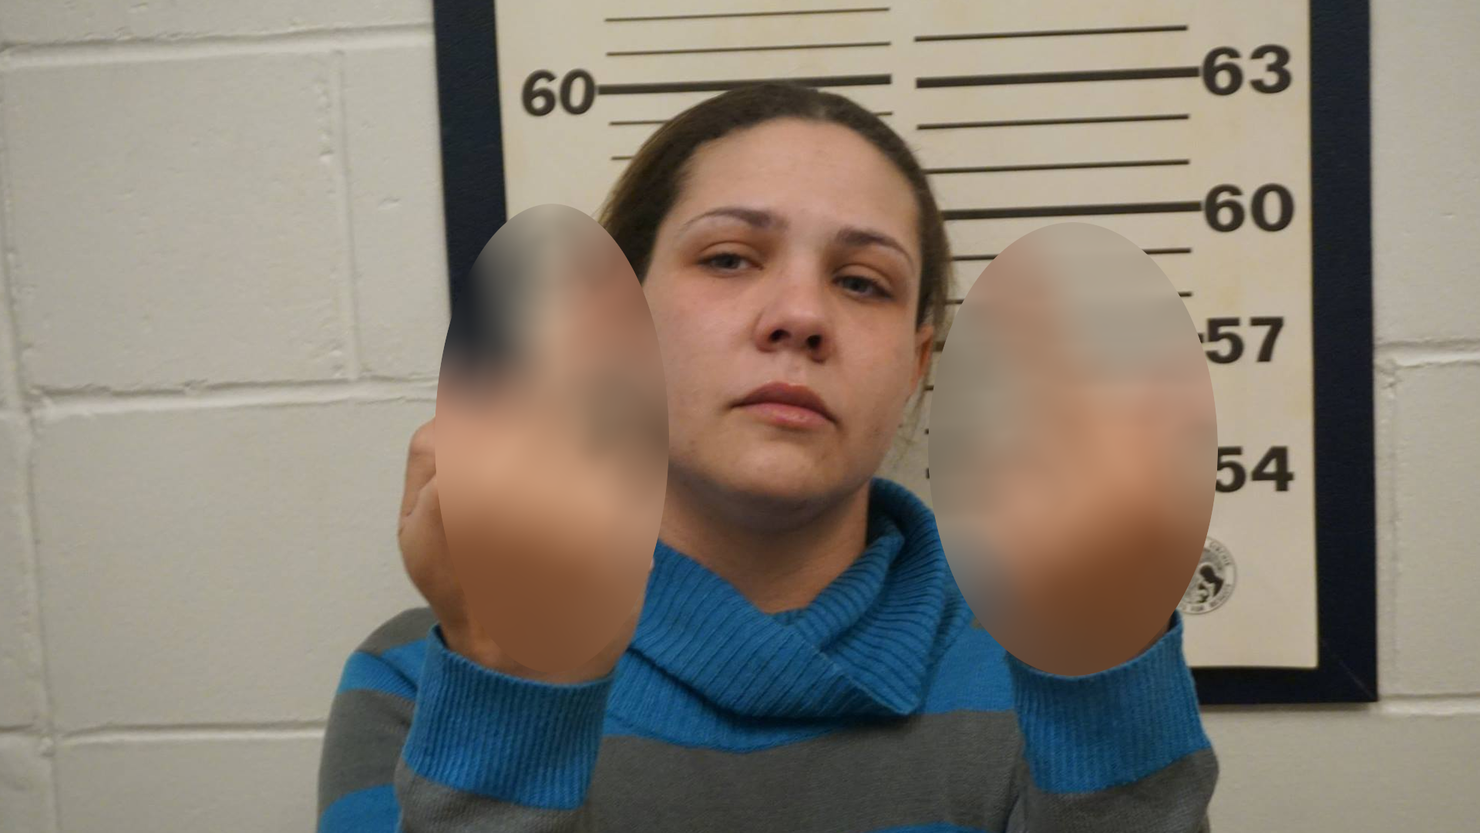 New Jersey Woman Accused Of Burglary Flips The Bird At Police In Mugshot Iheart